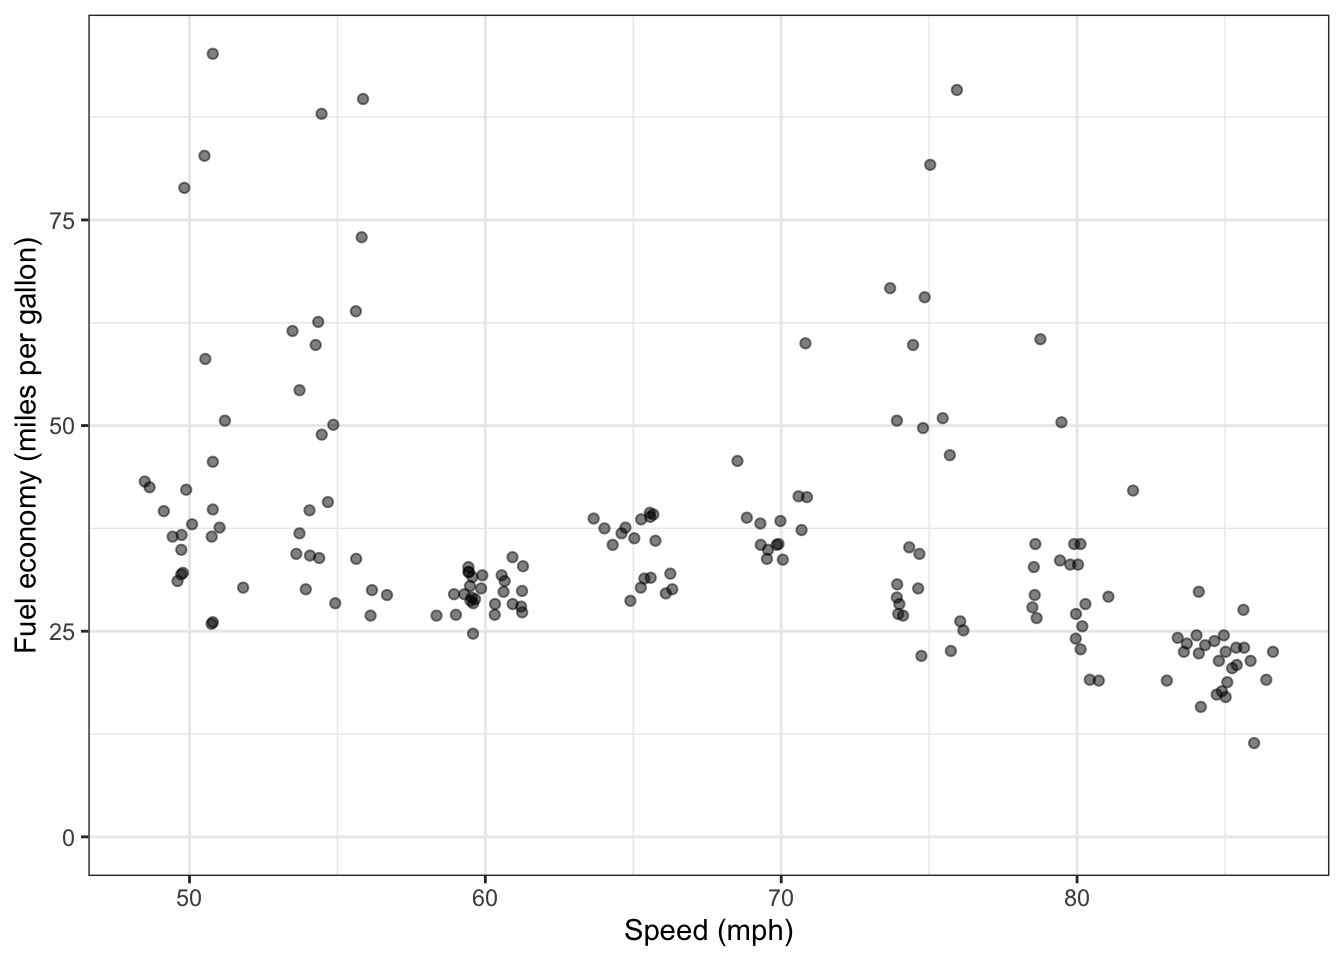 “Instantaneous” fuel economy recorded while driving steadily at each of several speeds. 95% prediction intervals are shown as well as the median fuel economy. Each dot corresponds to a roughly ten-second long time span.